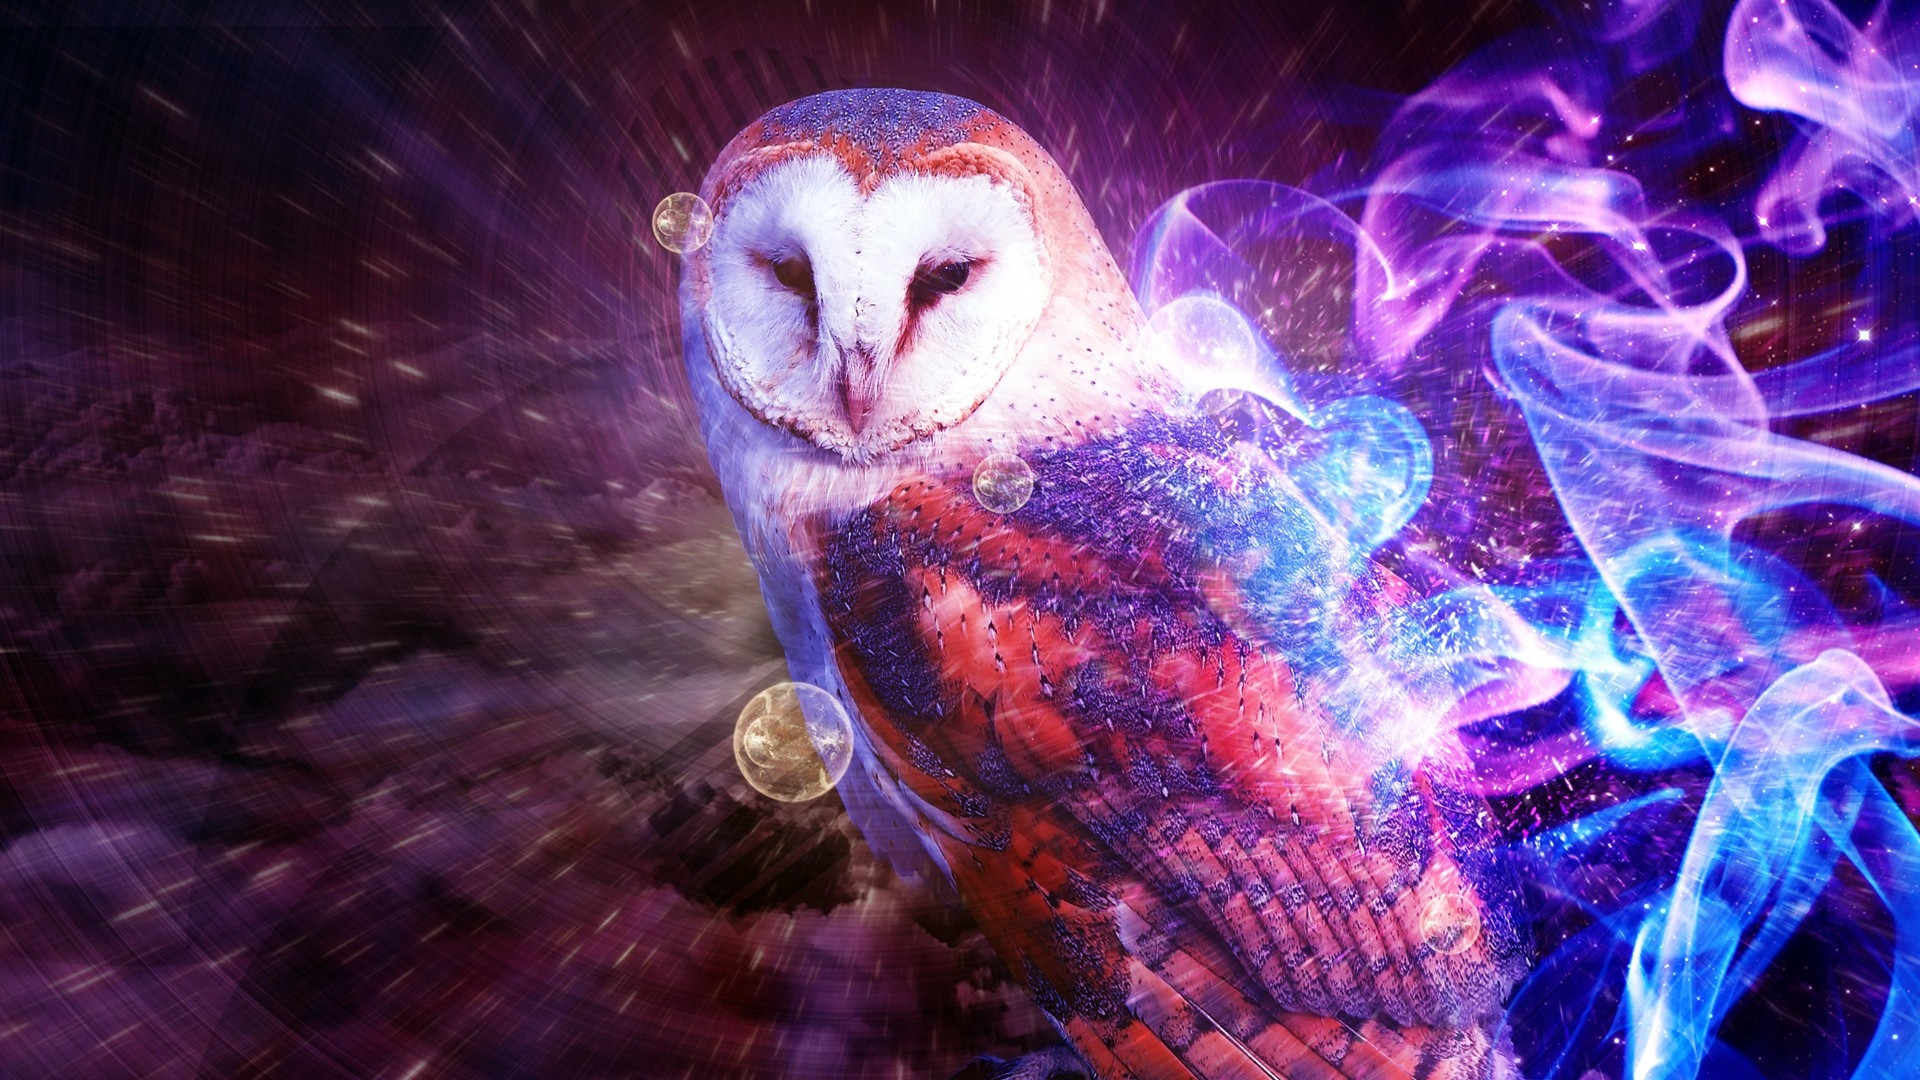 1920x1080 Some trippy owl thing.